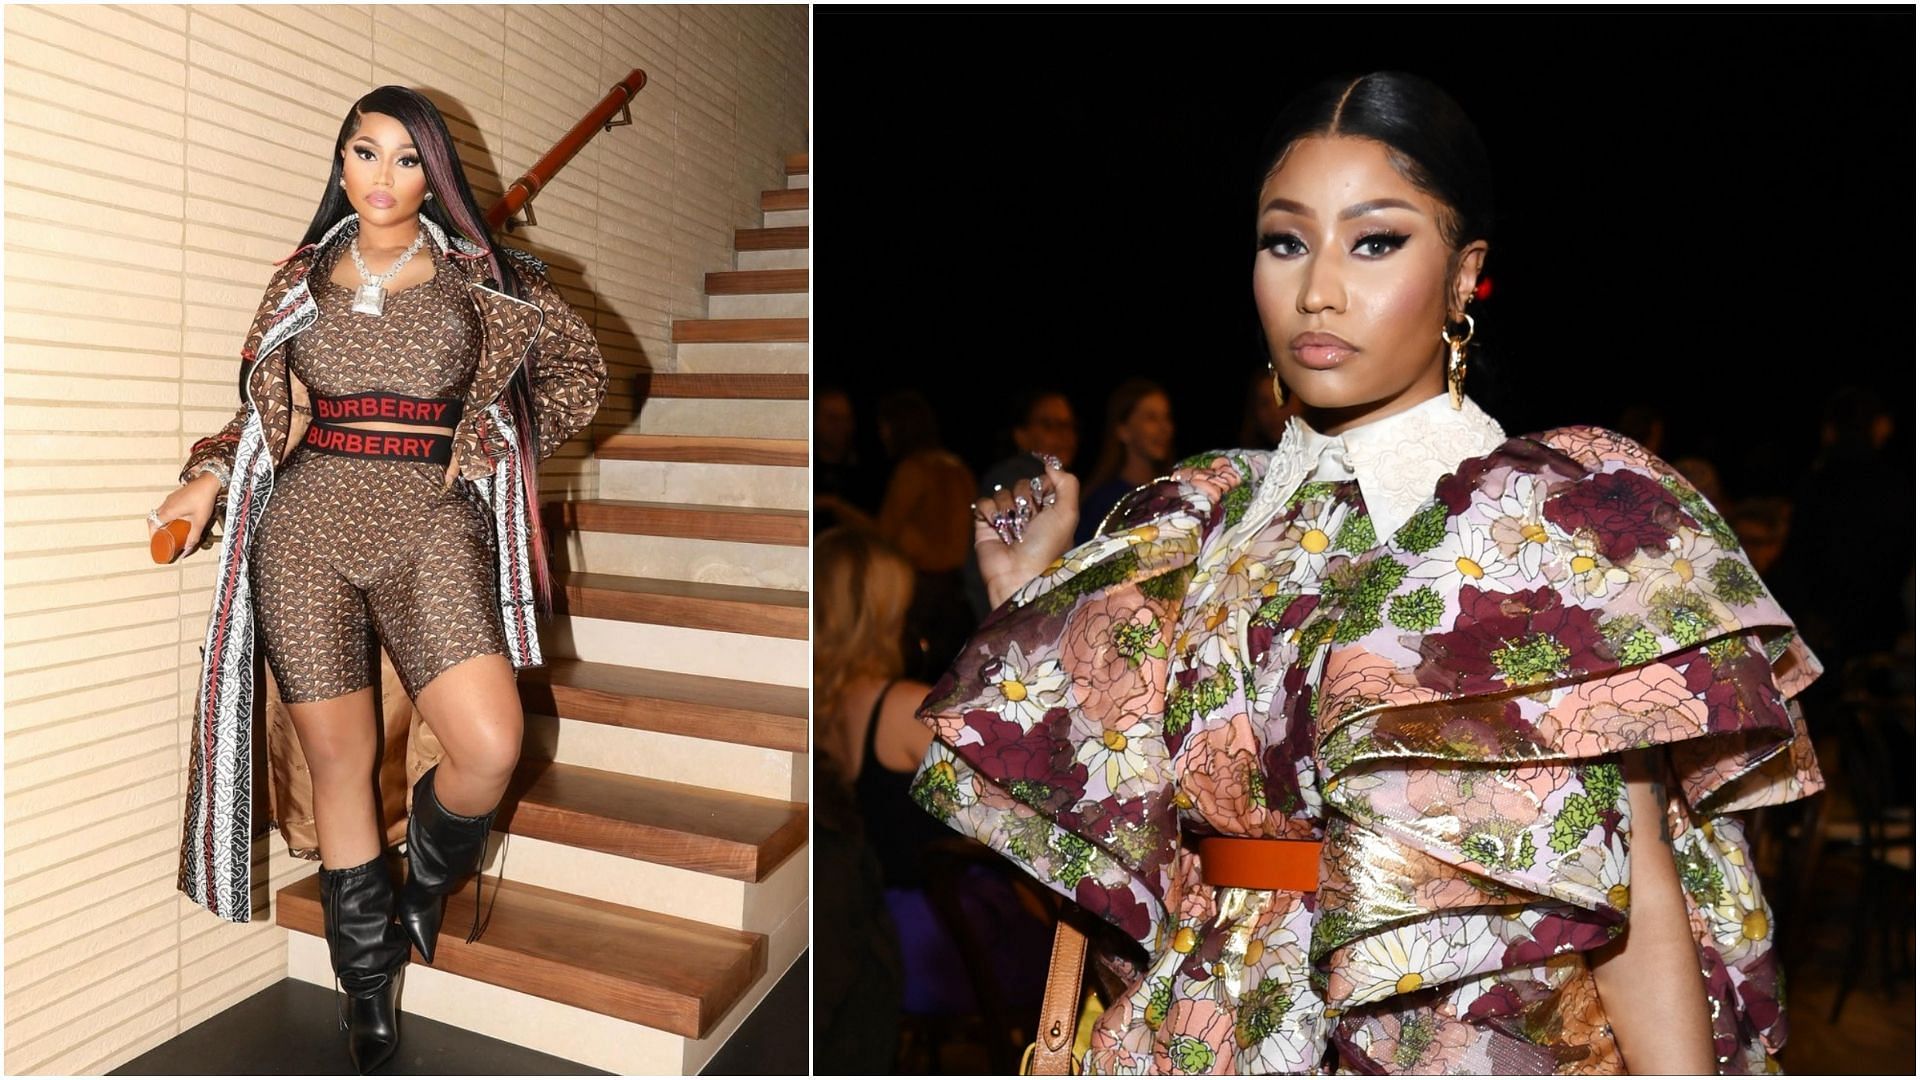 Nicki Minaj will soon release her documentary series on HBO Max. (Image via Instagram and Getty)